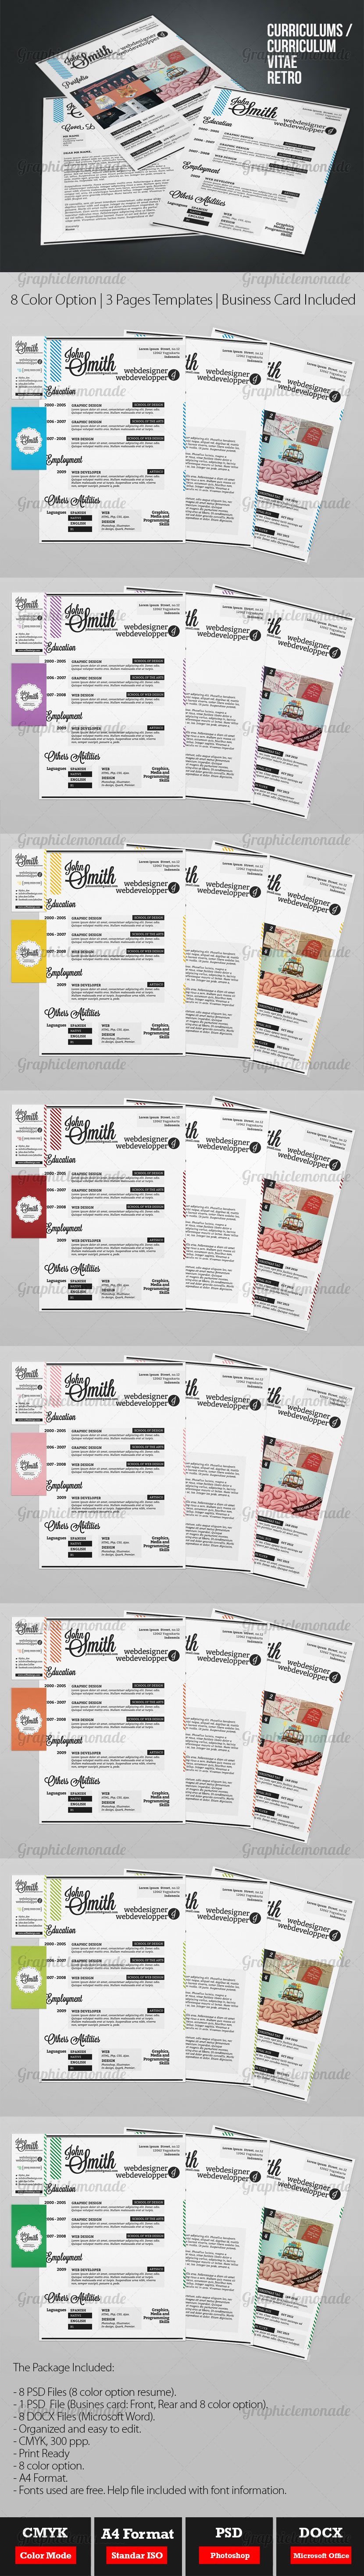 Curriculum Vitae Resume free free download CV Personal Identity elegant ready to print easy to edit